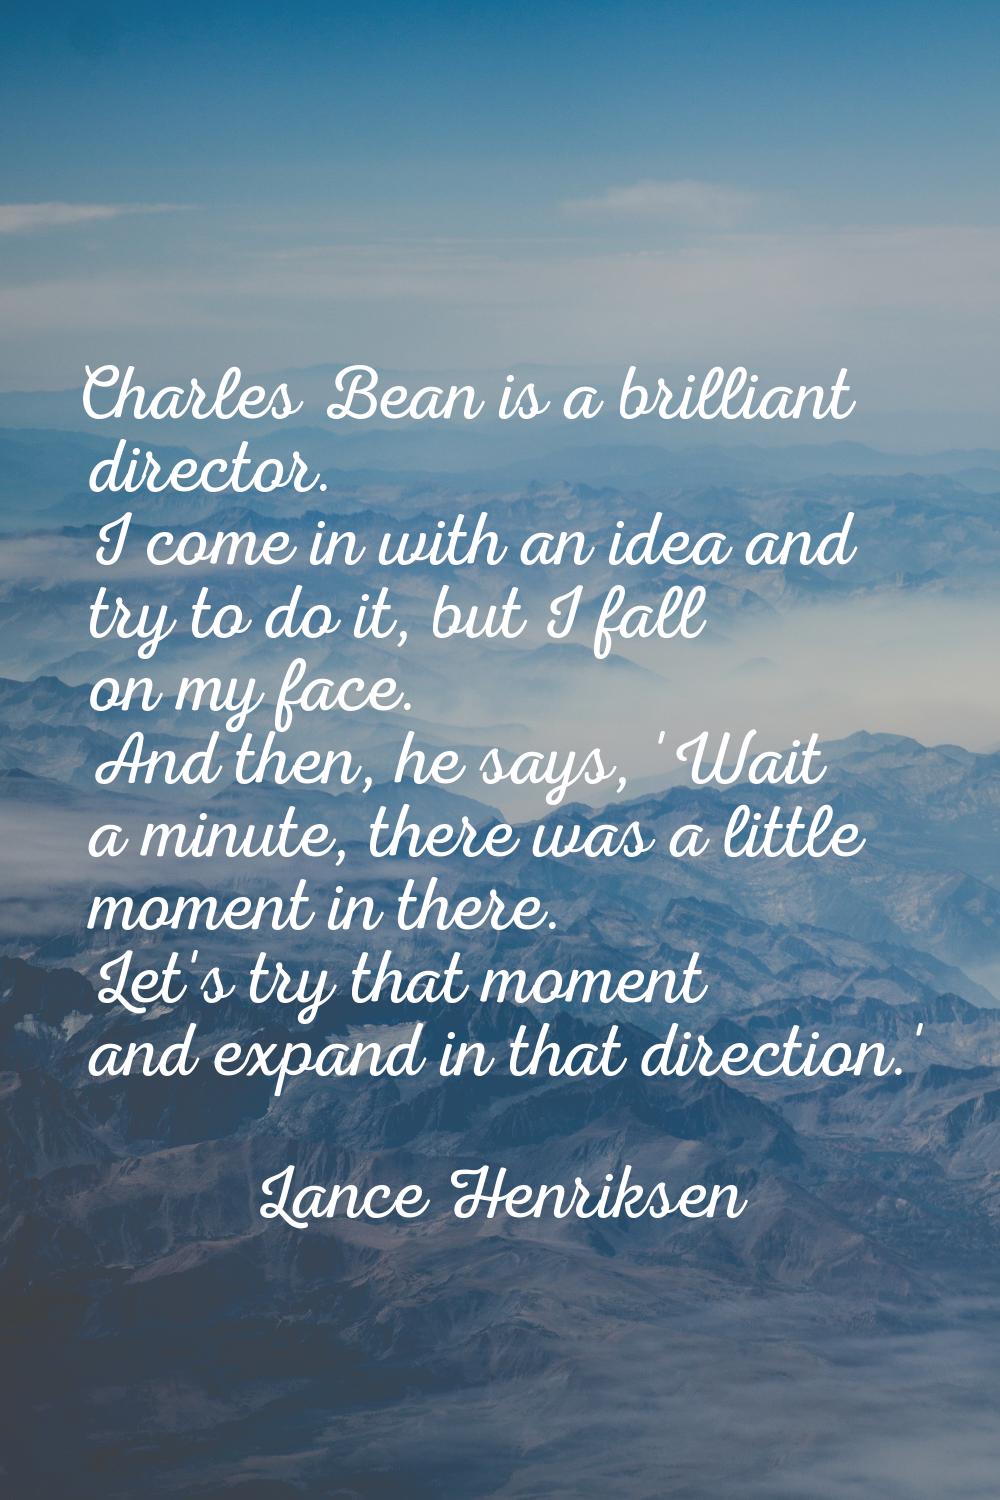 Charles Bean is a brilliant director. I come in with an idea and try to do it, but I fall on my fac